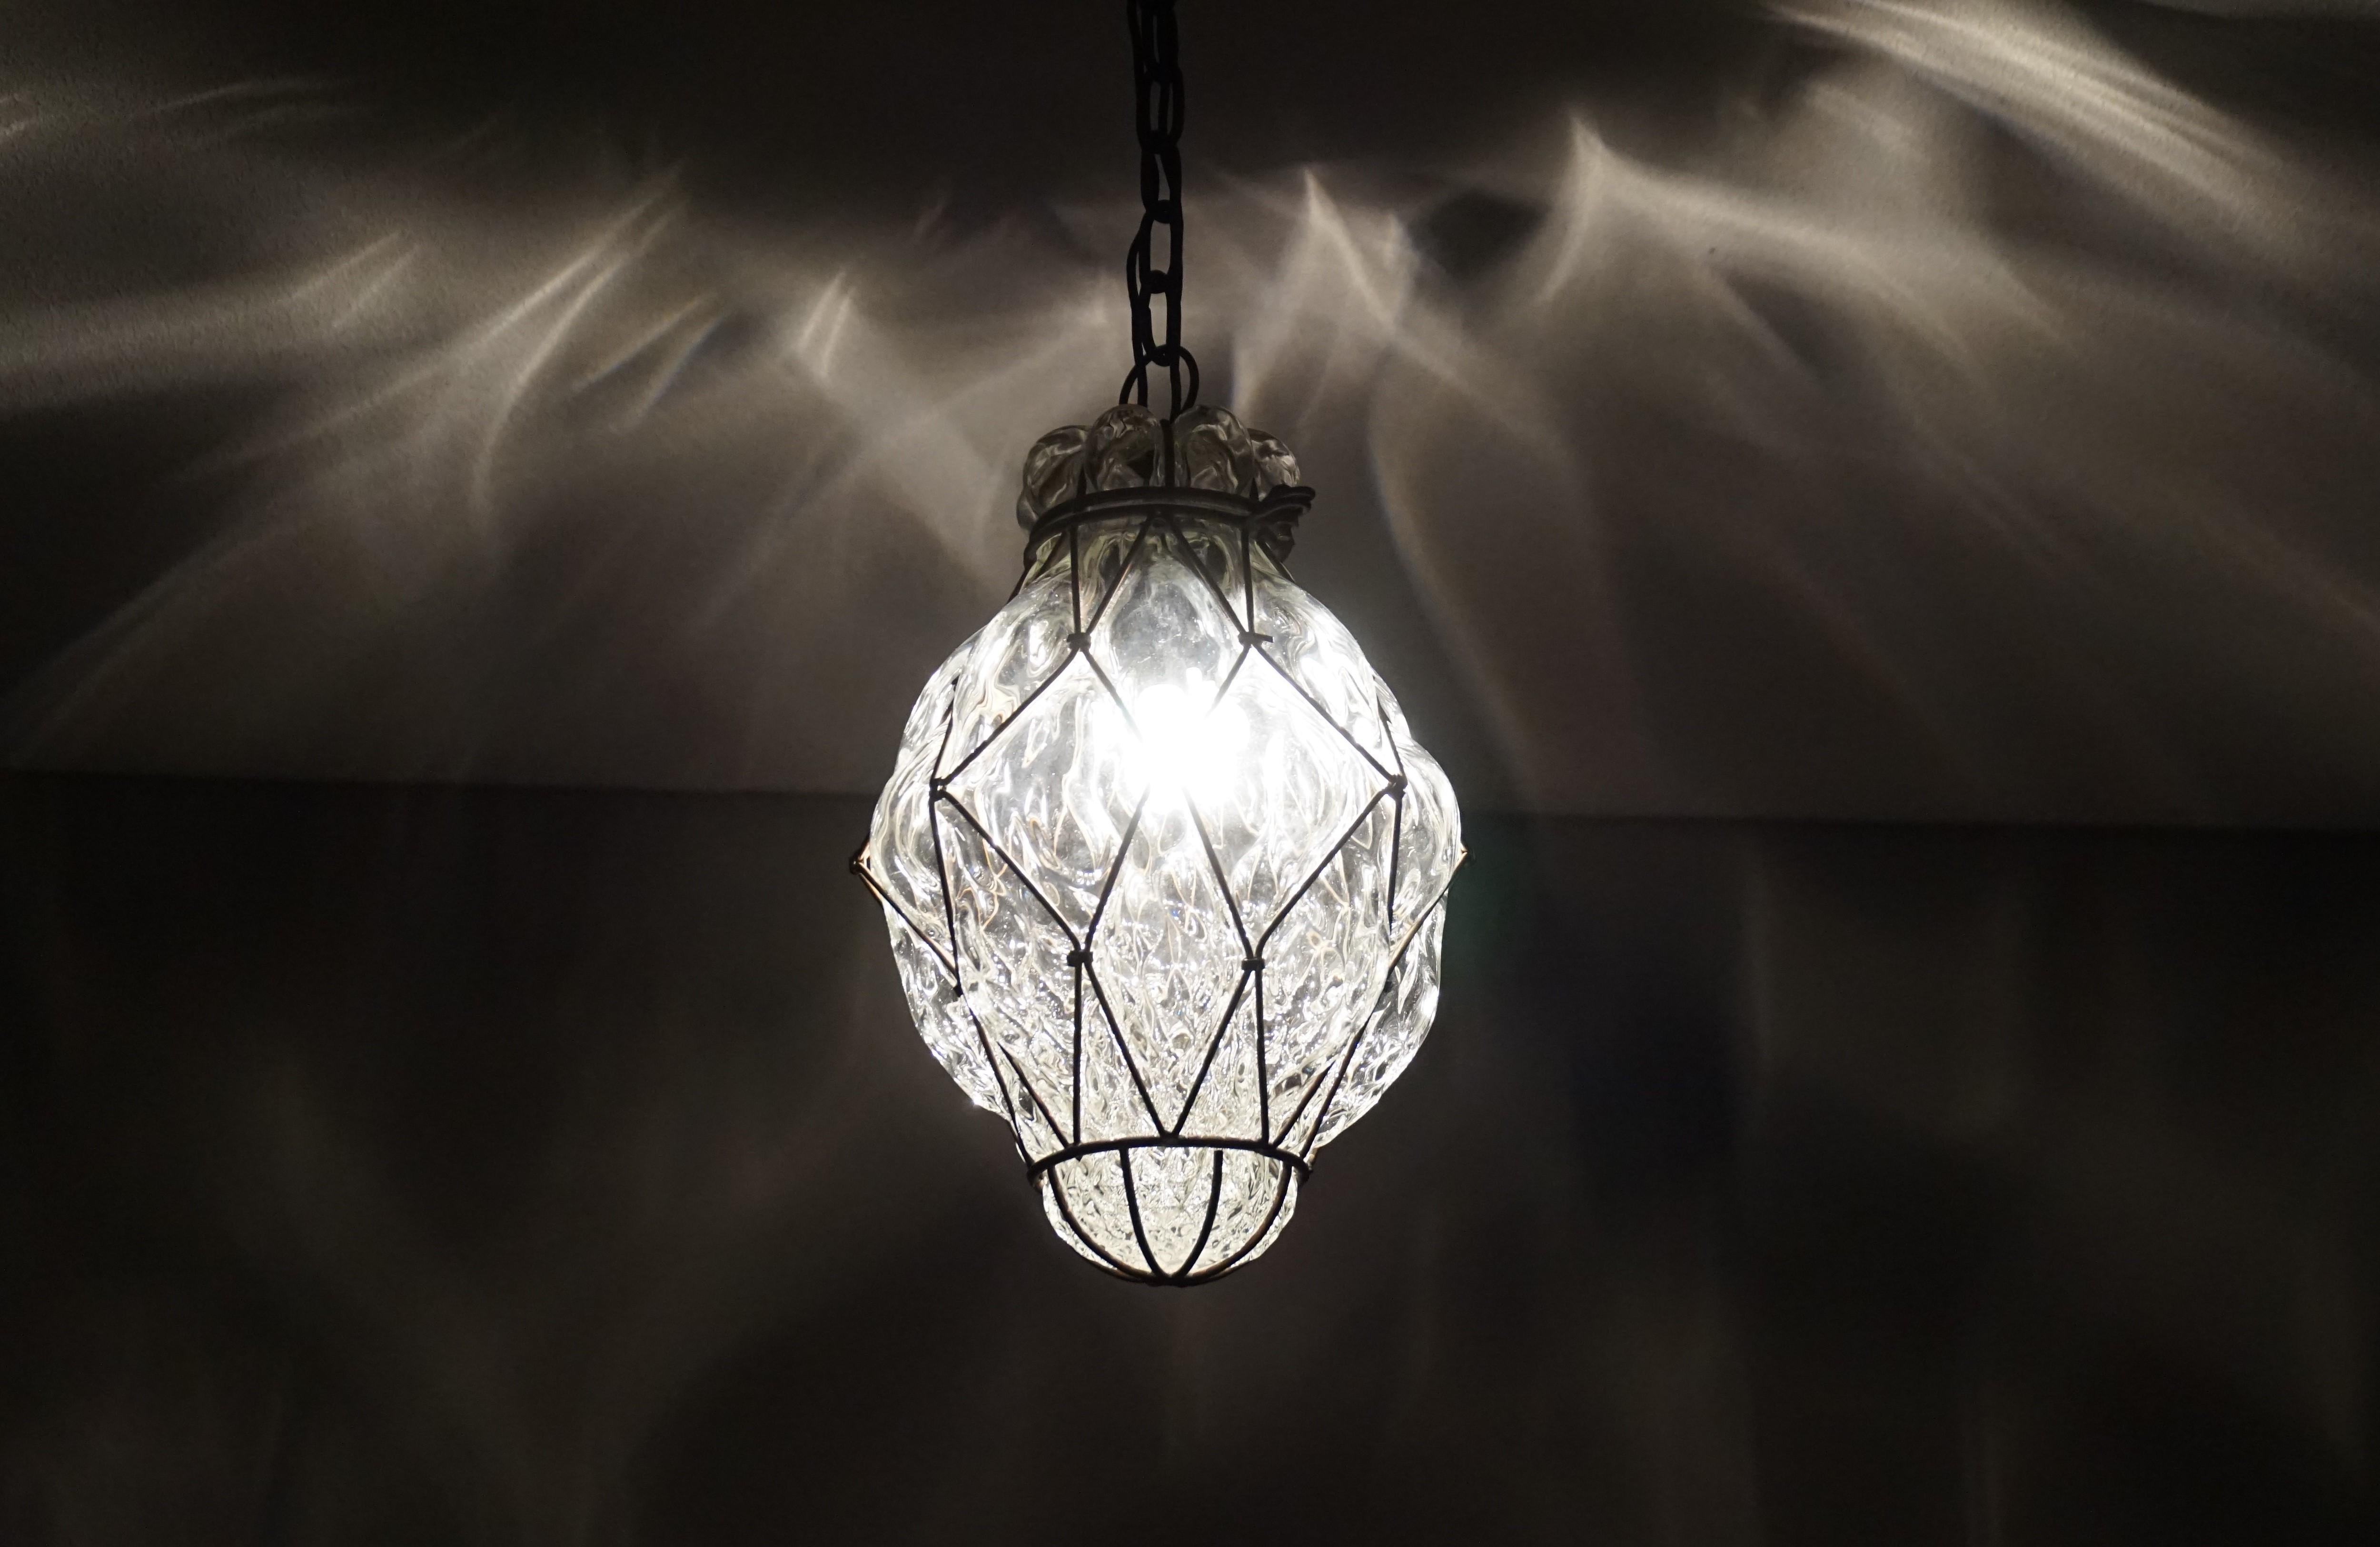 Hand-Crafted Arts & Crafts Venetian Pendant Light of Mouthblown Glass into an Iron Frame